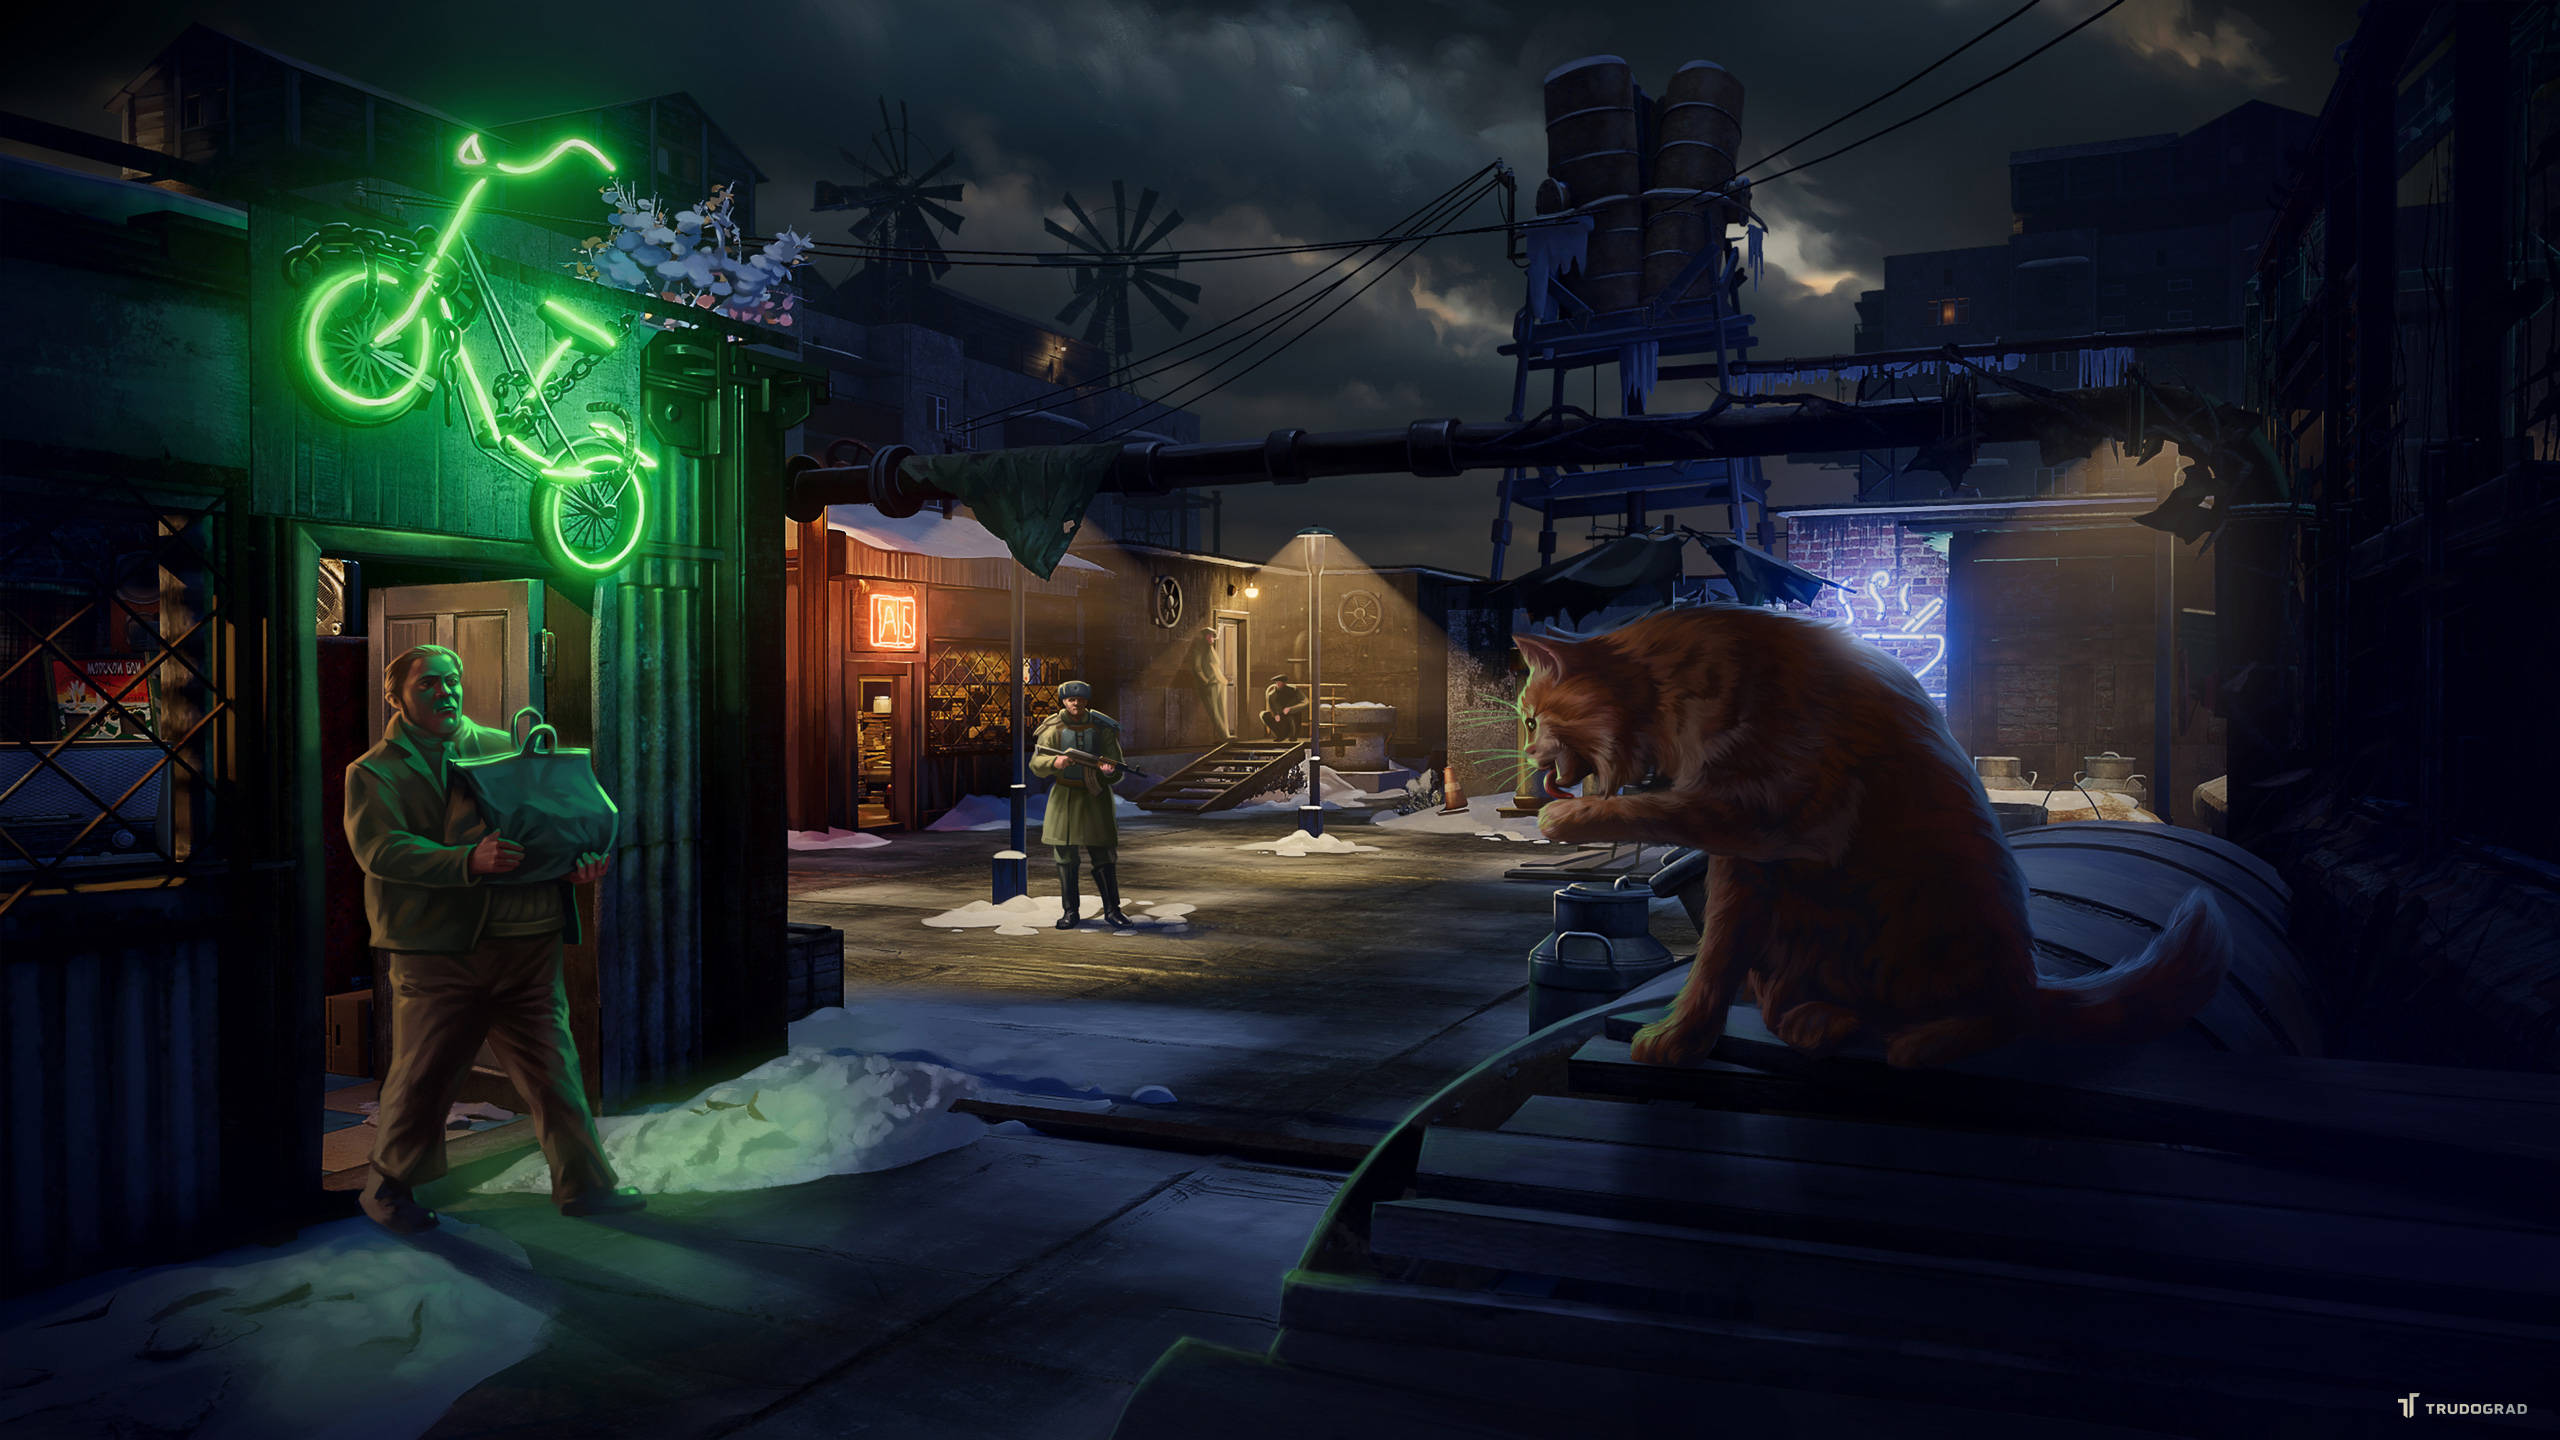 ATOM RPG RPG Doomsday Wasteland Game Trudograd Neon Video Games Cats Men Video Game Art 2560x1440